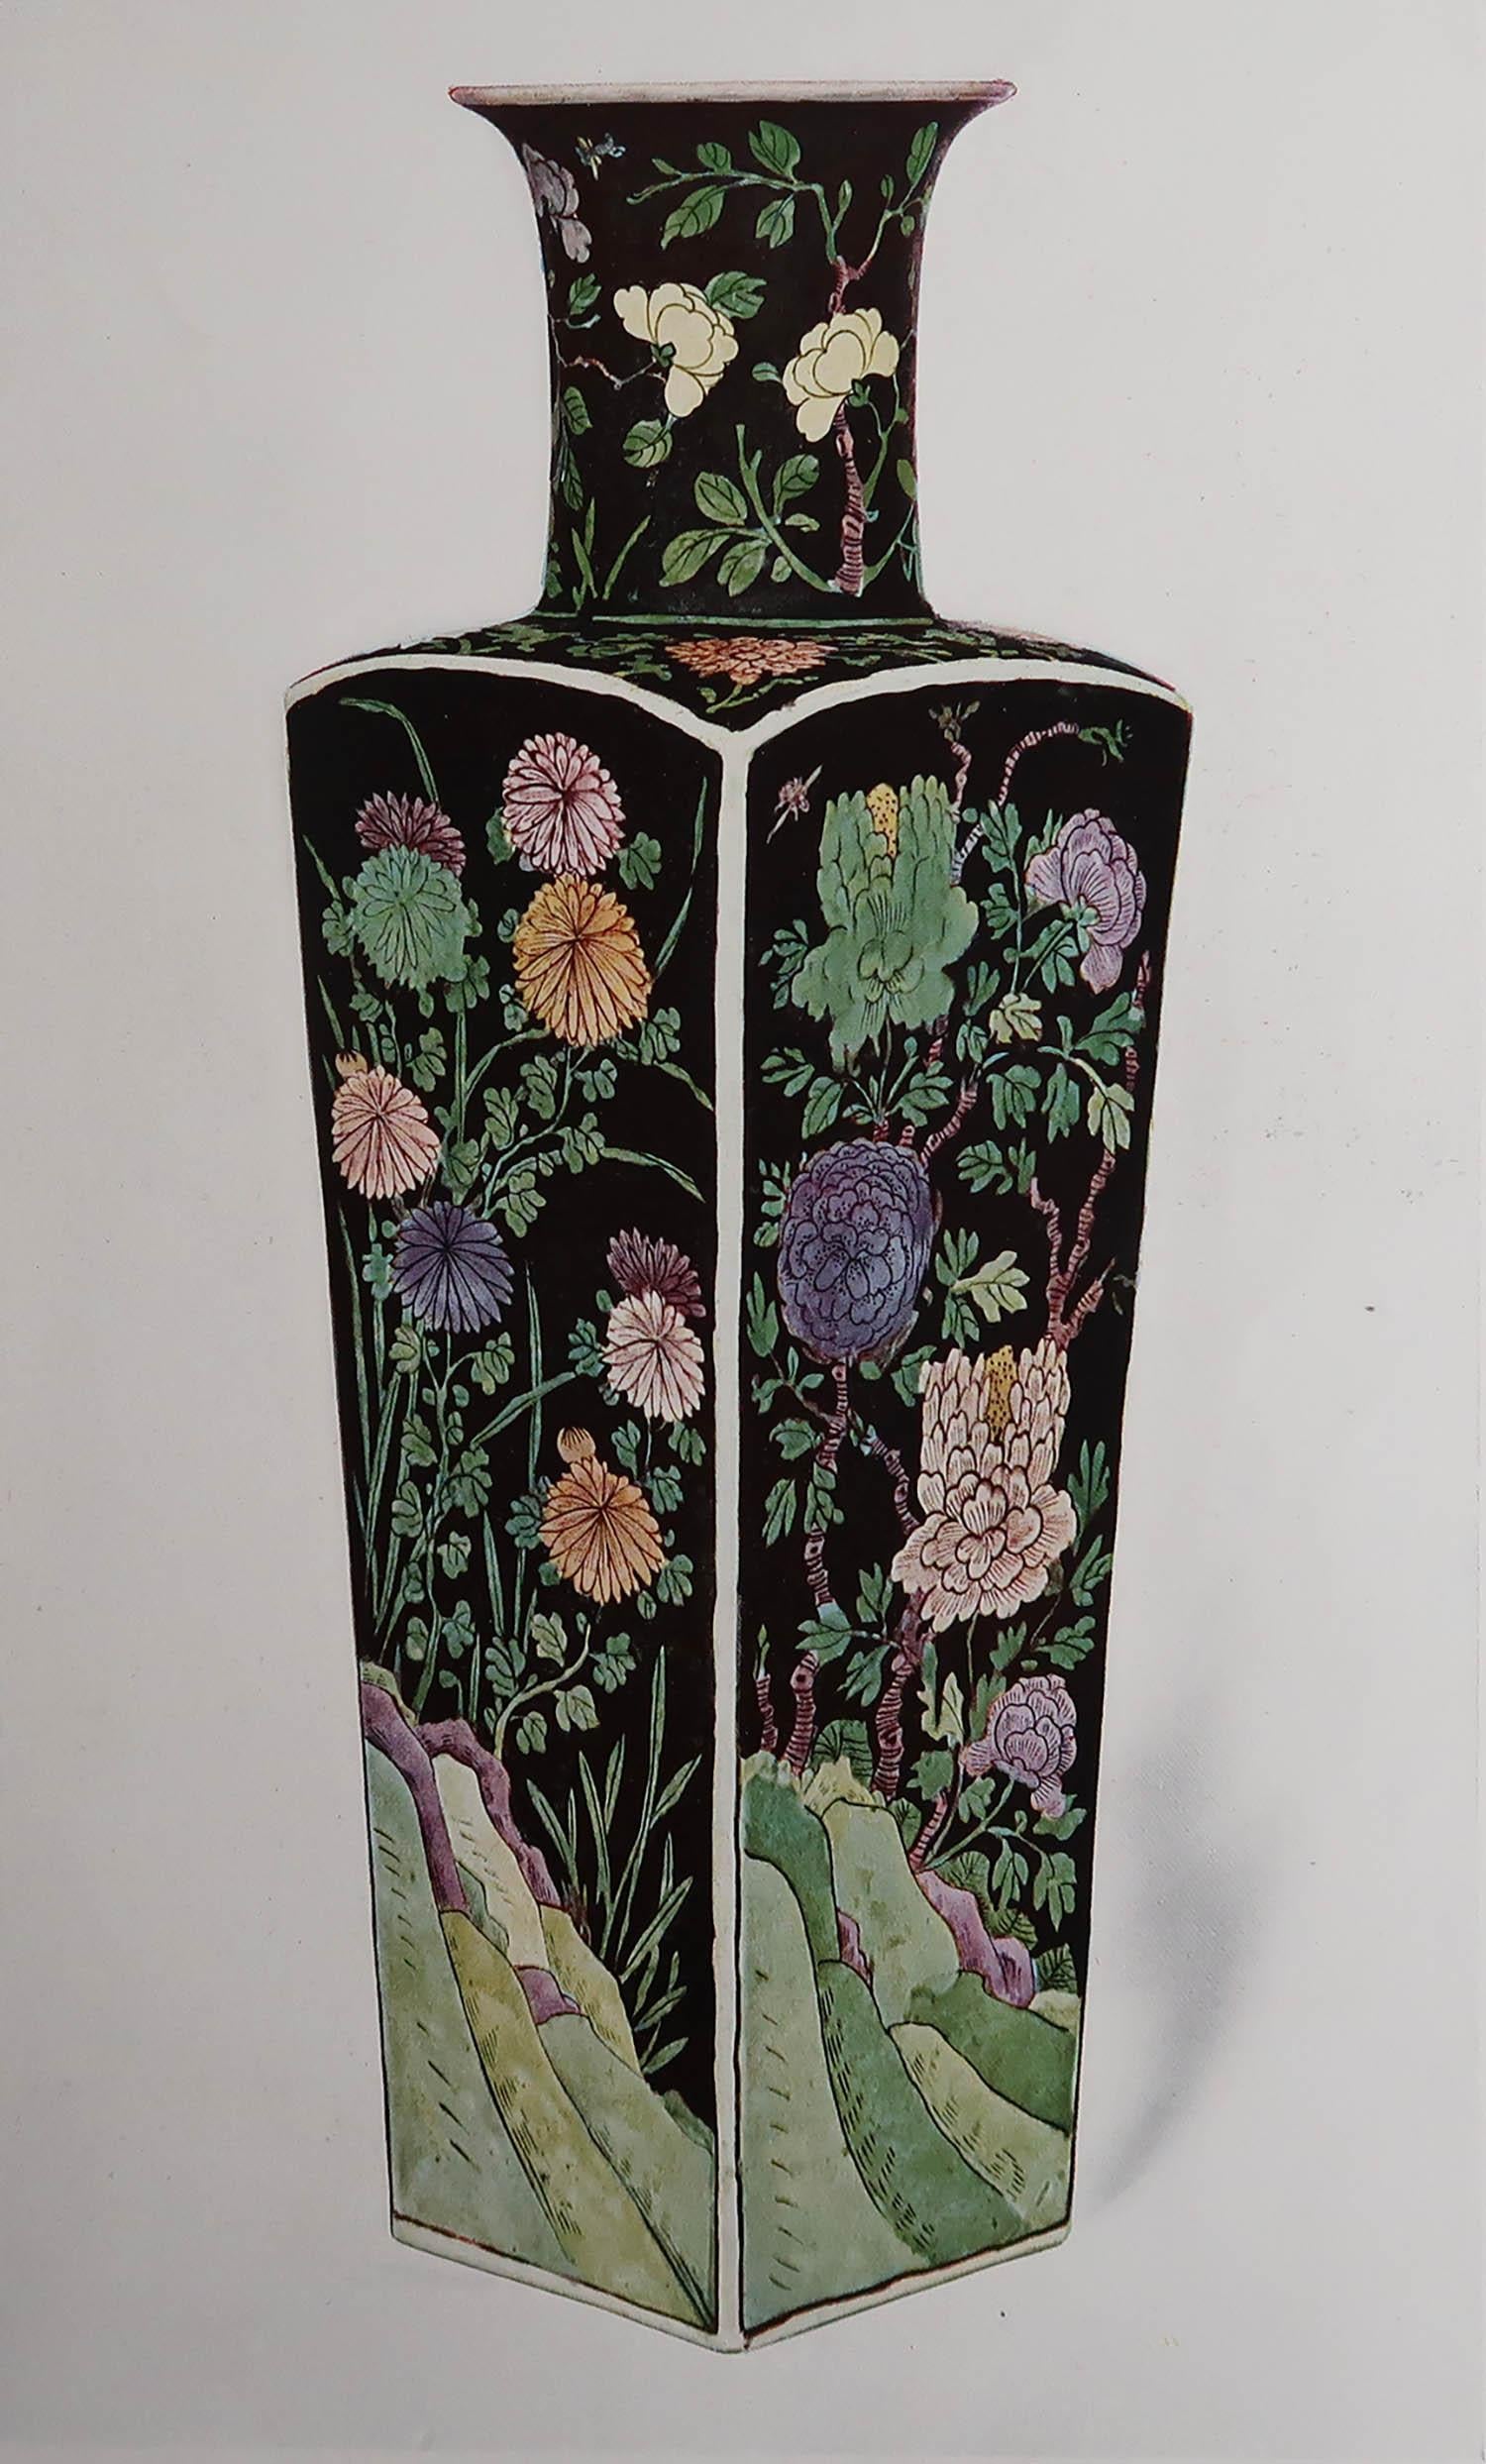 Wonderful print of a famille noire Chinese vase.

Lovely colors.

Chromolithograph 

Published by Connoisseur, circa 1900

Unframed.

